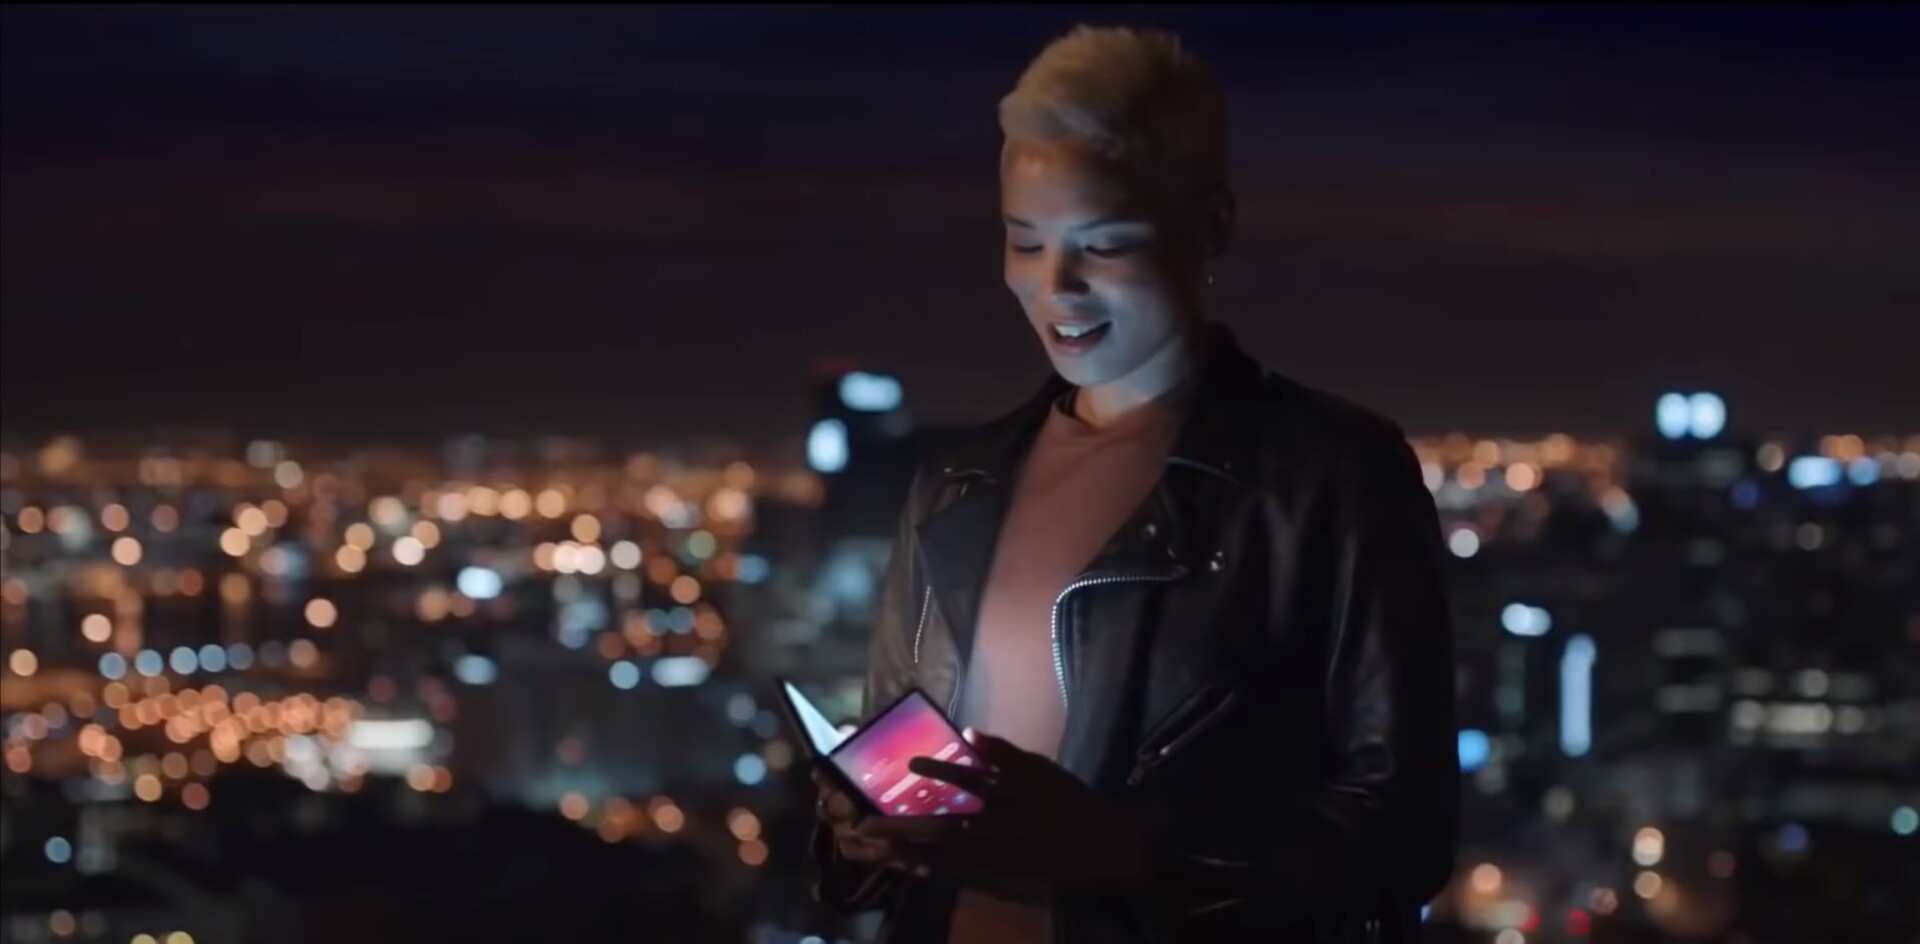 A woman holding a folding phone in front of a city at night - Mobile World Congress 2019